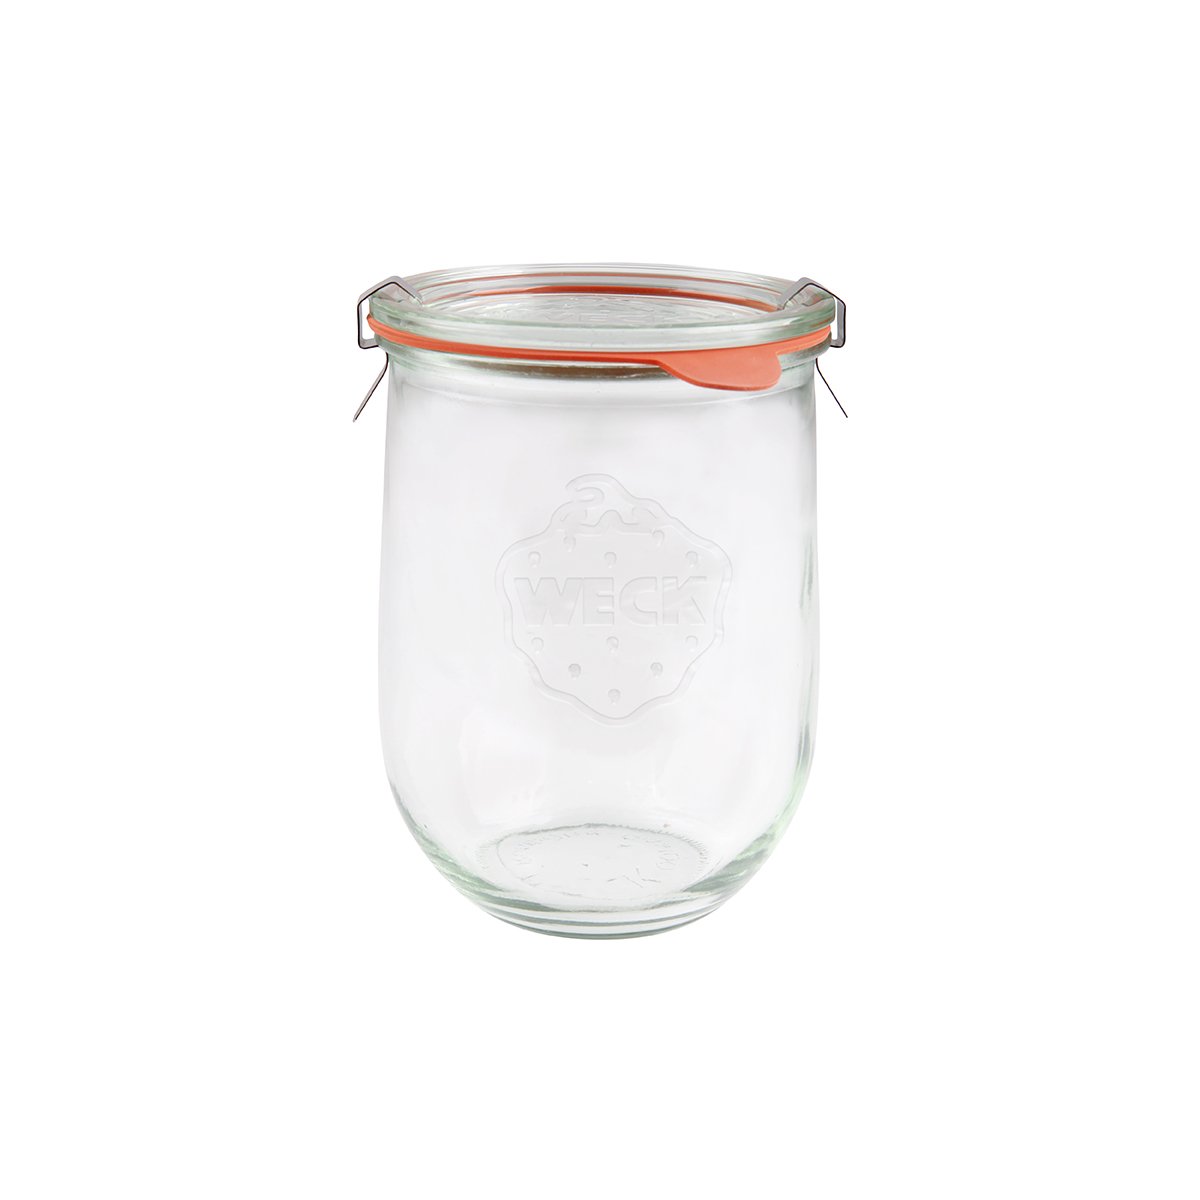 9982379 Weck Complete Glass Jar with Lid 100x147mm / 1062ml Tomkin Australia Hospitality Supplies